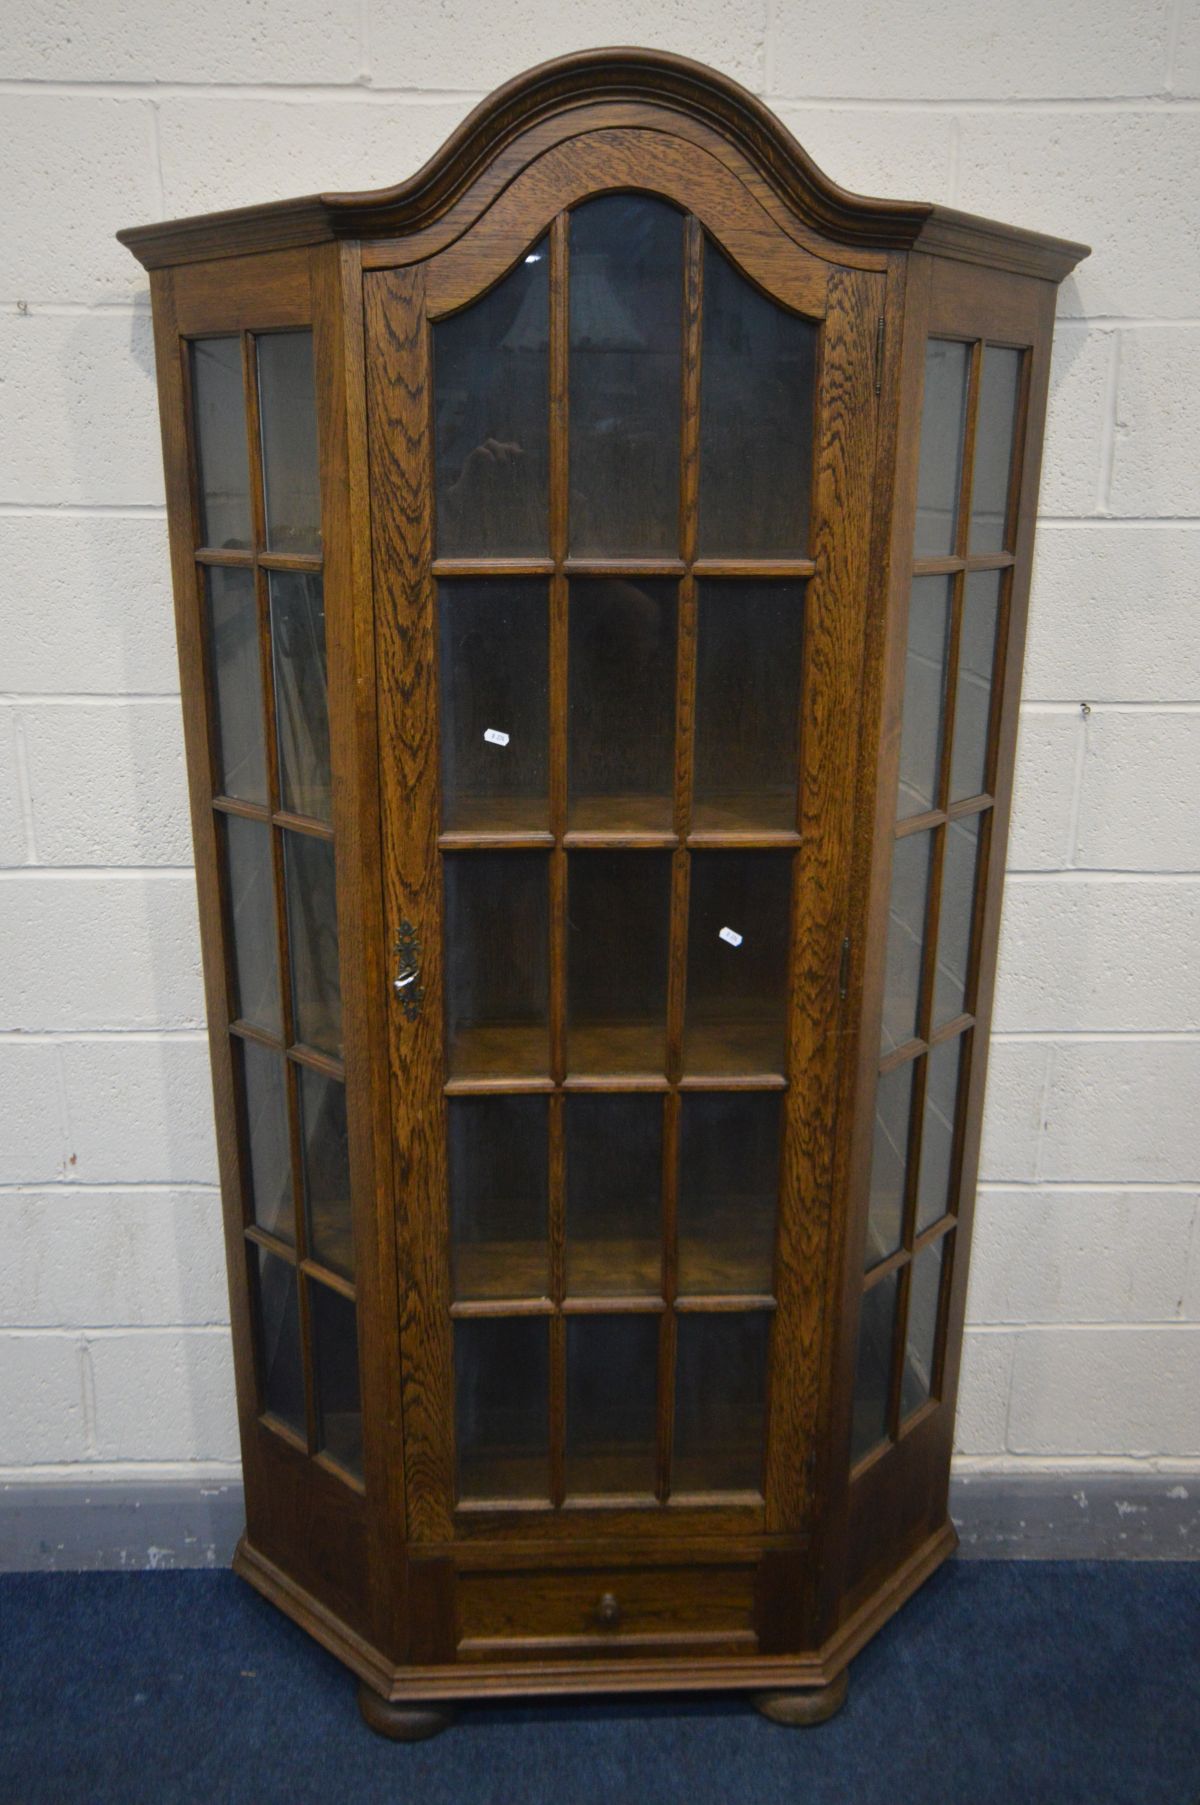 AN OAK CANTED SINGLE DOOR DISPLAY CABINET, with a single drawer, width 107cm x depth 31cm x height